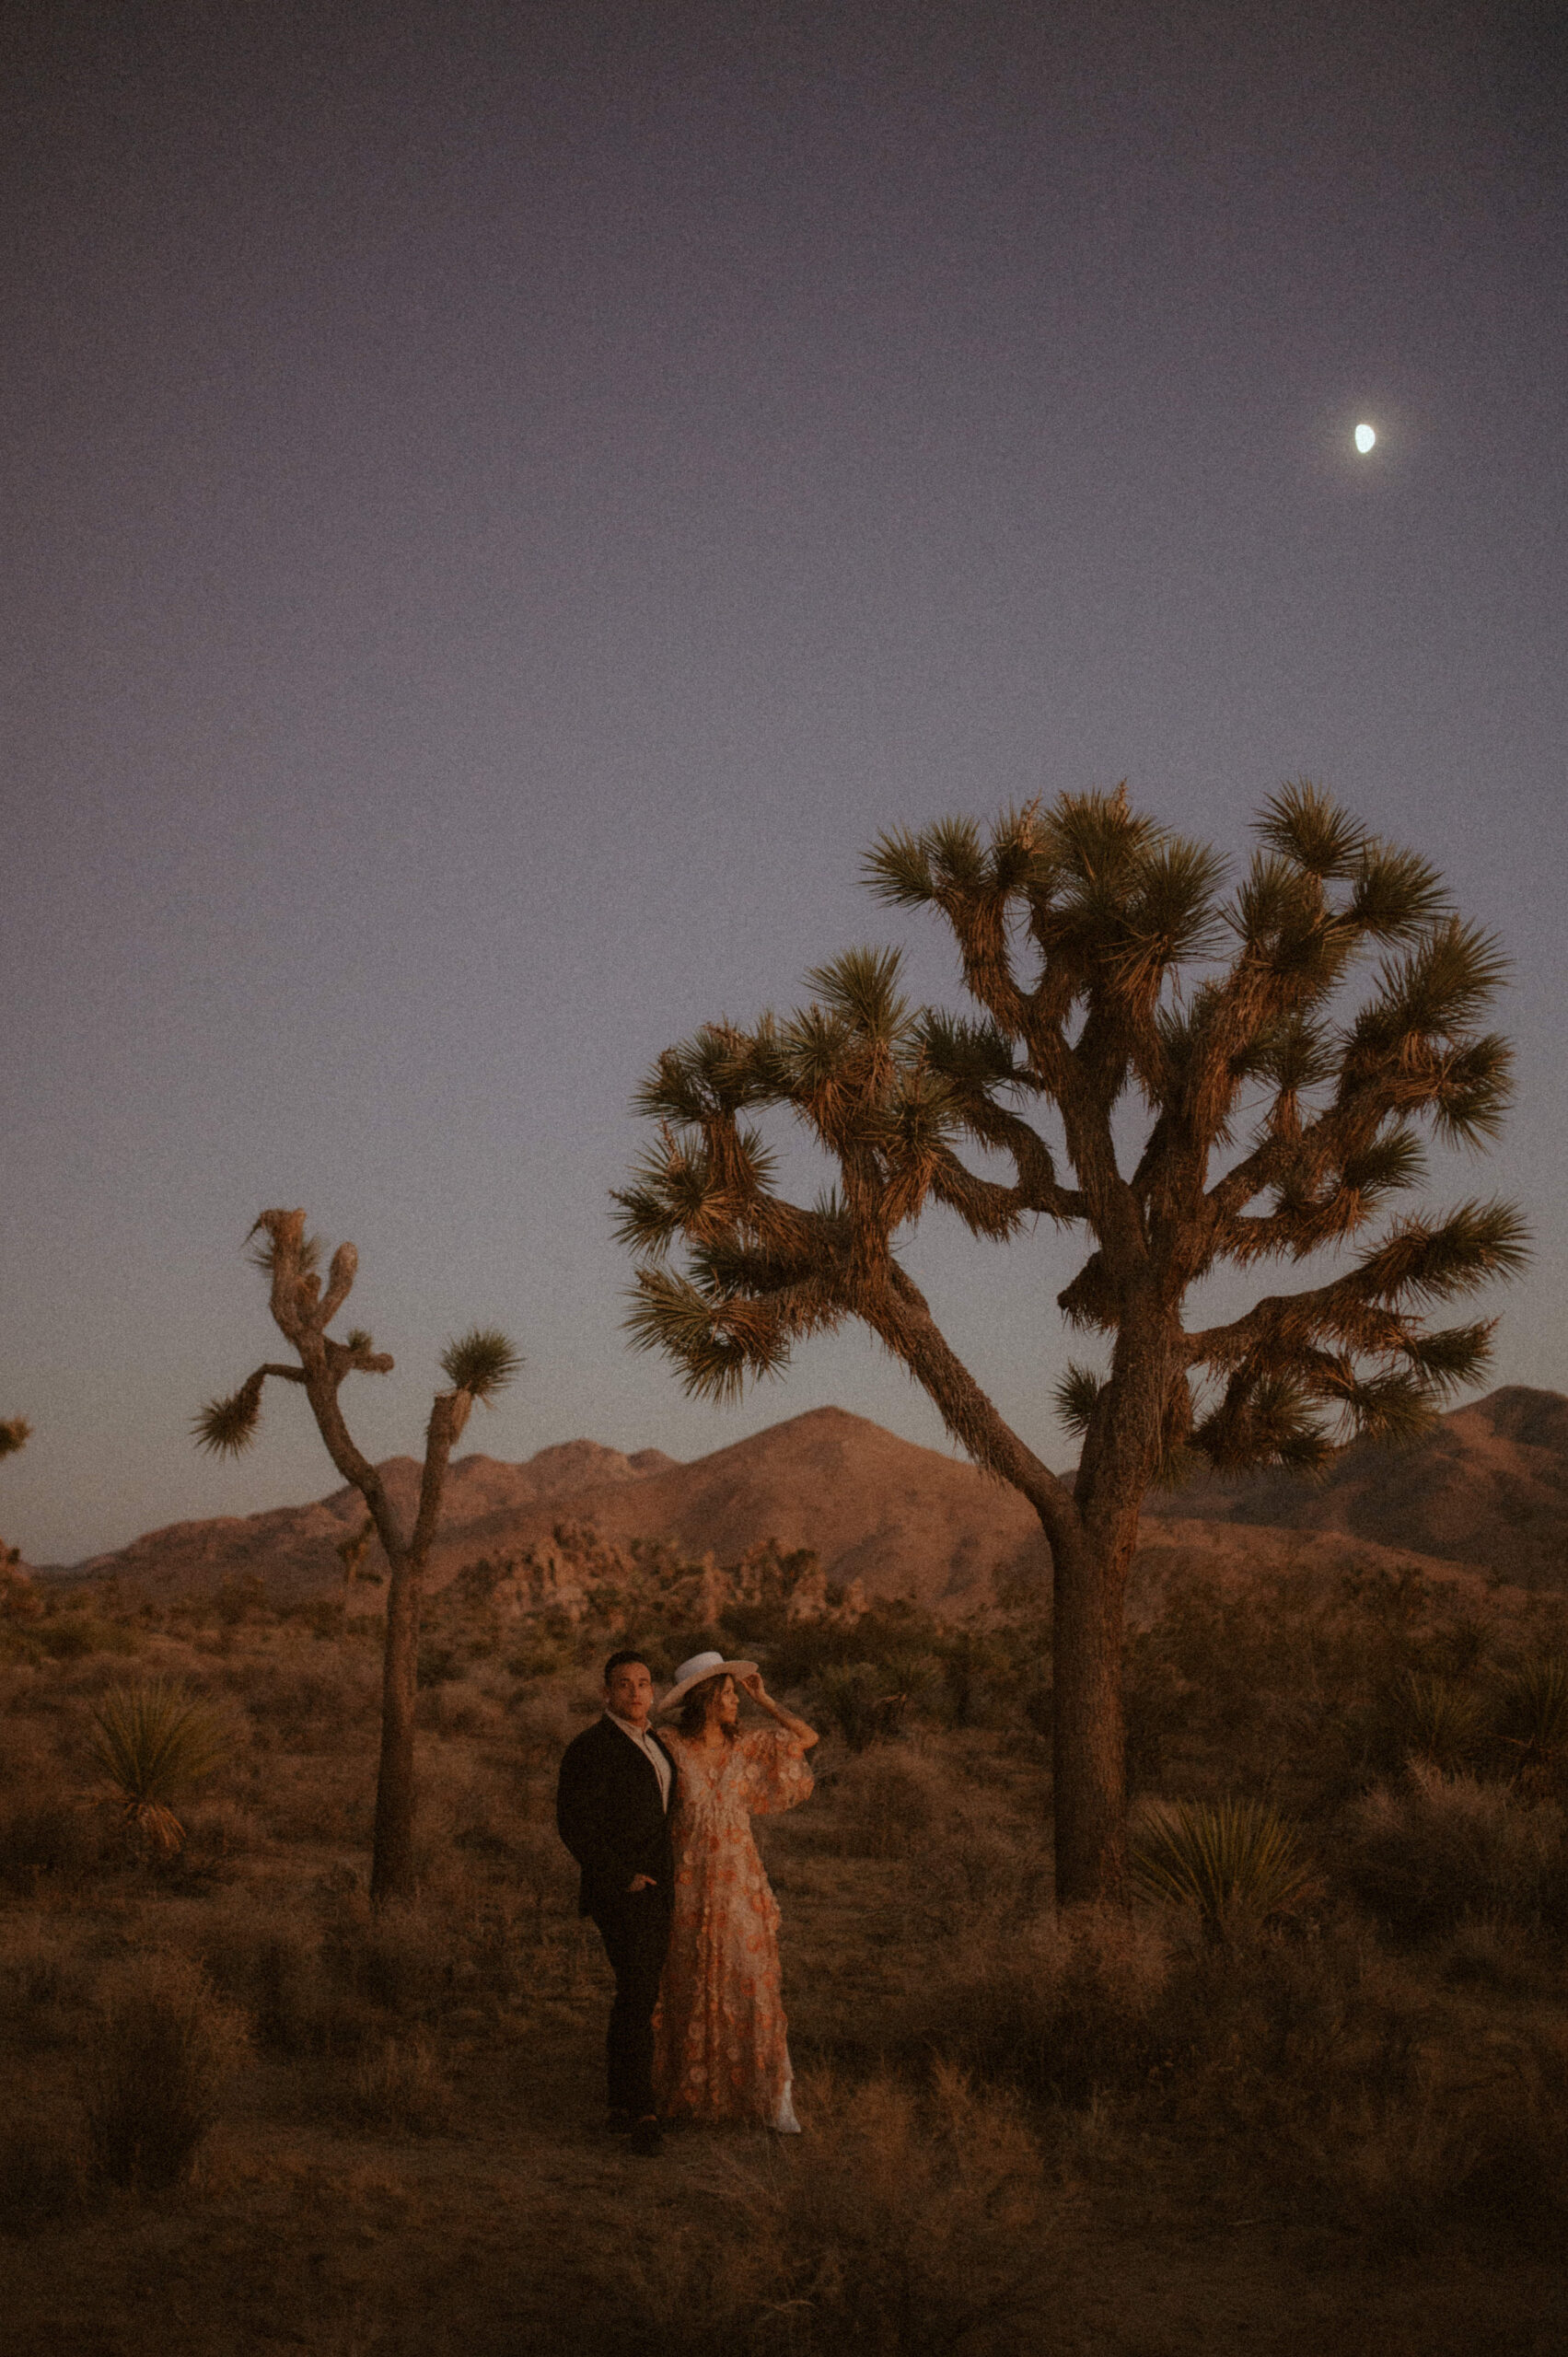 Elope in Joshua Tree. Tips for eloping in Joshua tree from an elopement photographer. Joshua Tree Elopement